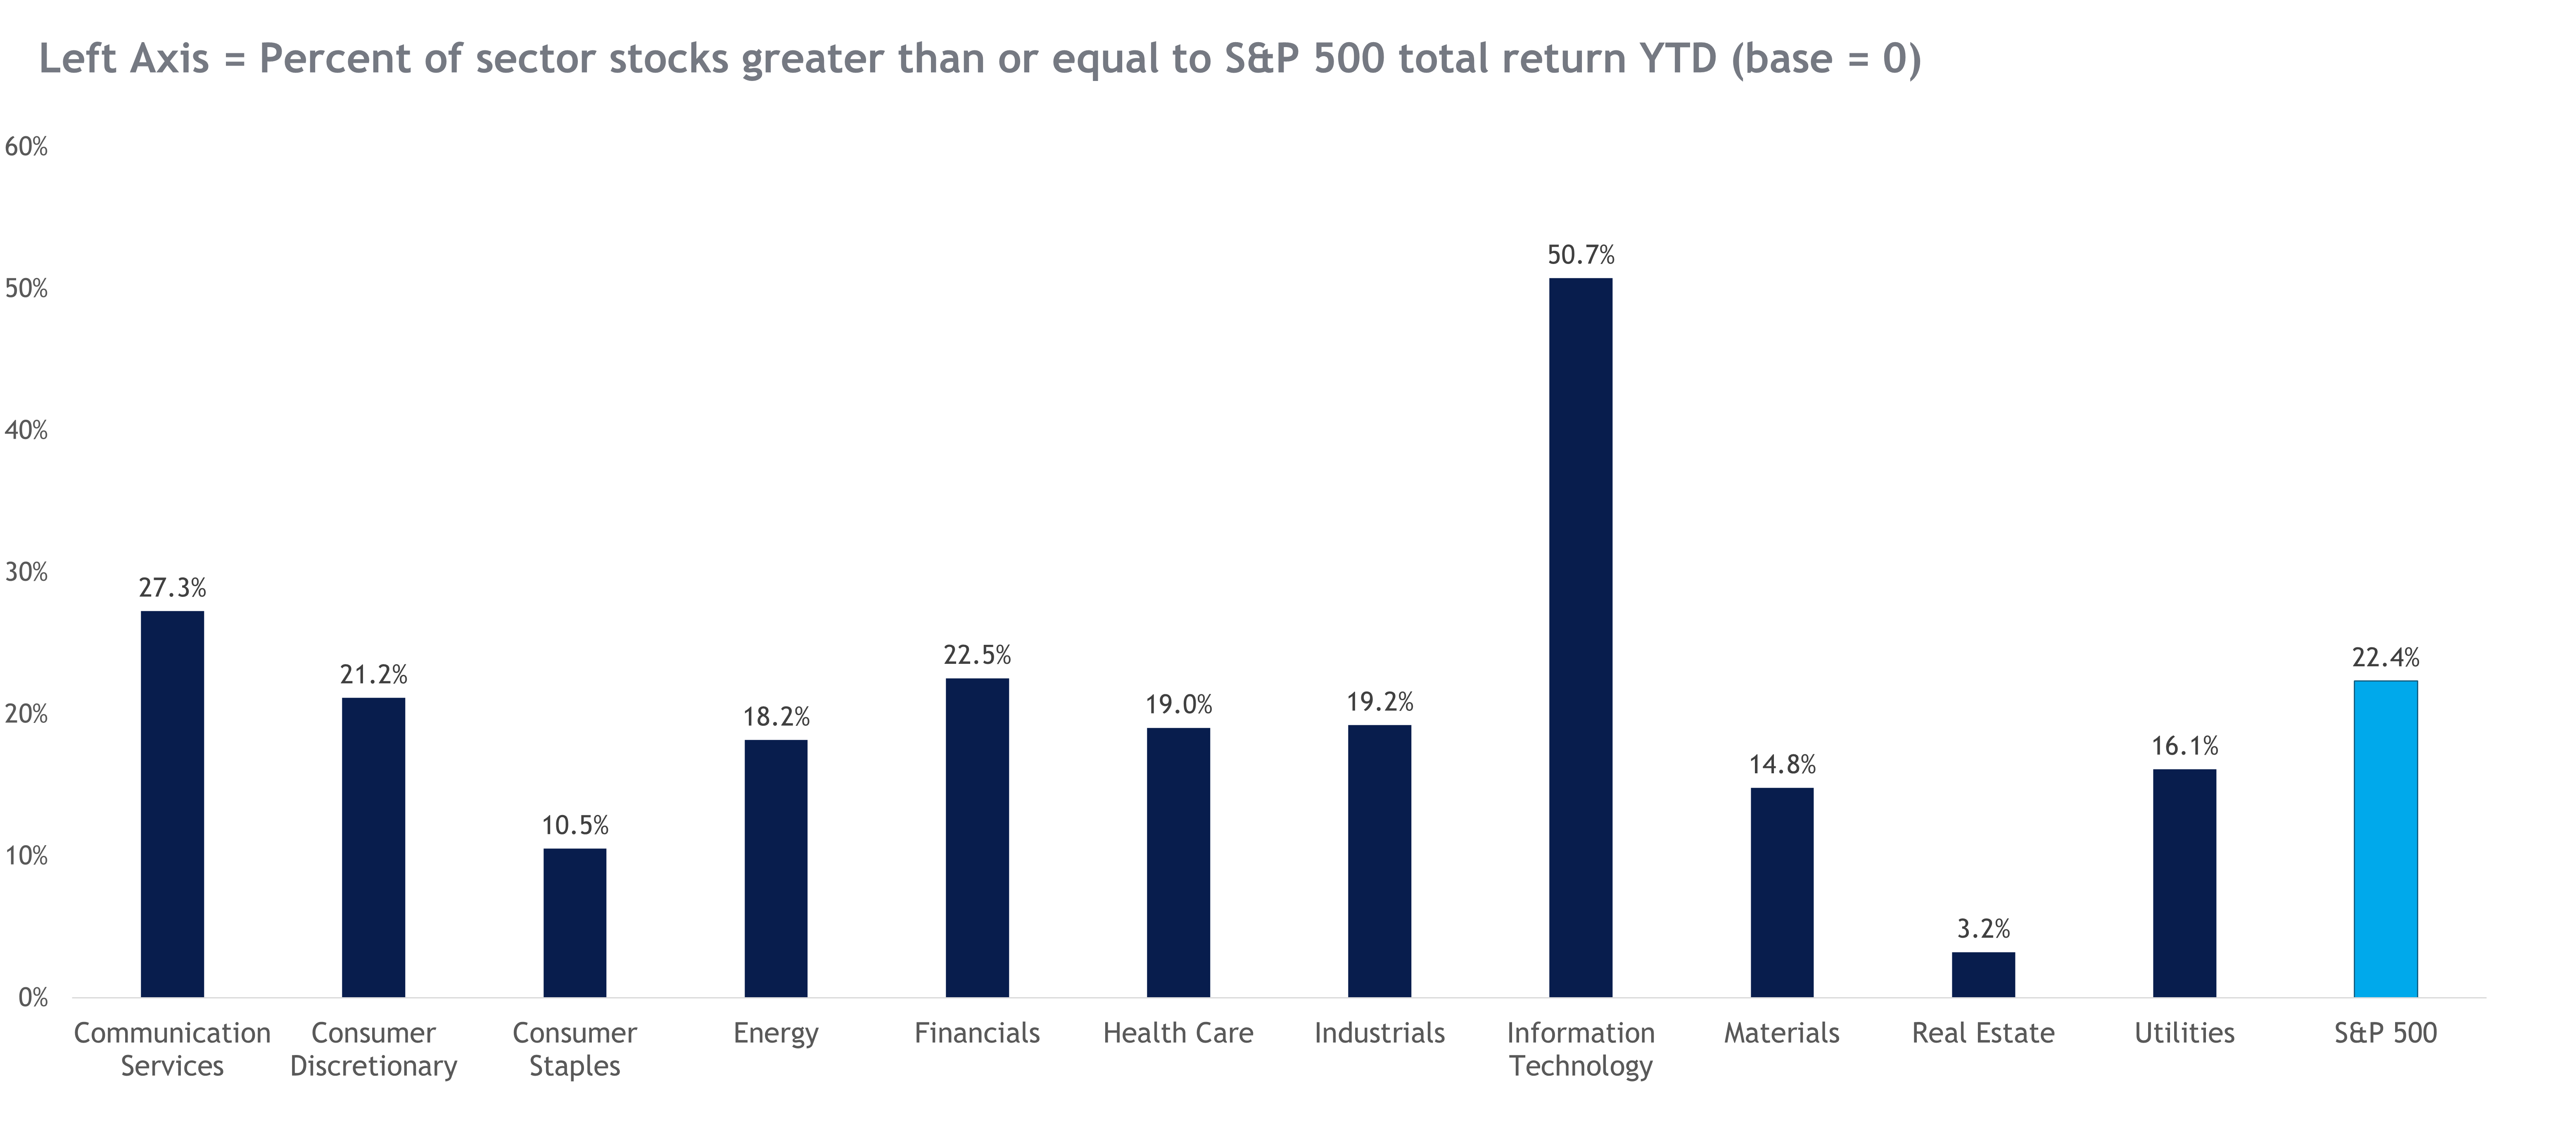 Chart depicting percentage of sector stocks with a total return YTD greater than or equal to the S&P 500's total return YTD.